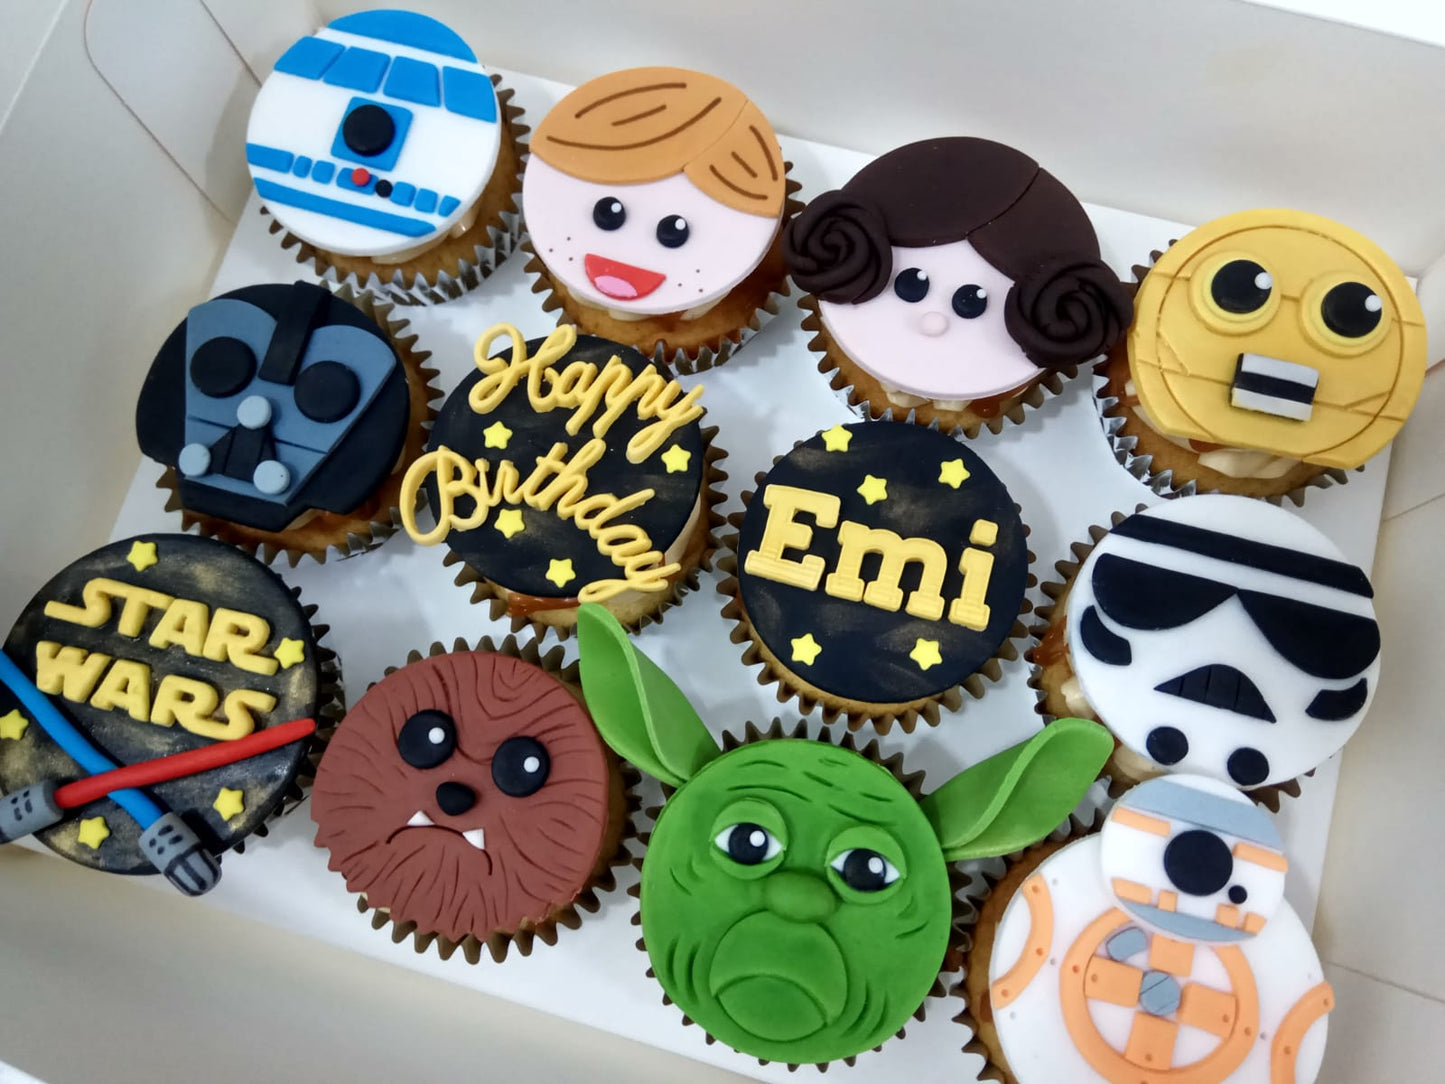 Starwars Cupcakes (Box of 12) - Cuppacakes - Singapore's Very Own Cupcakes Shop